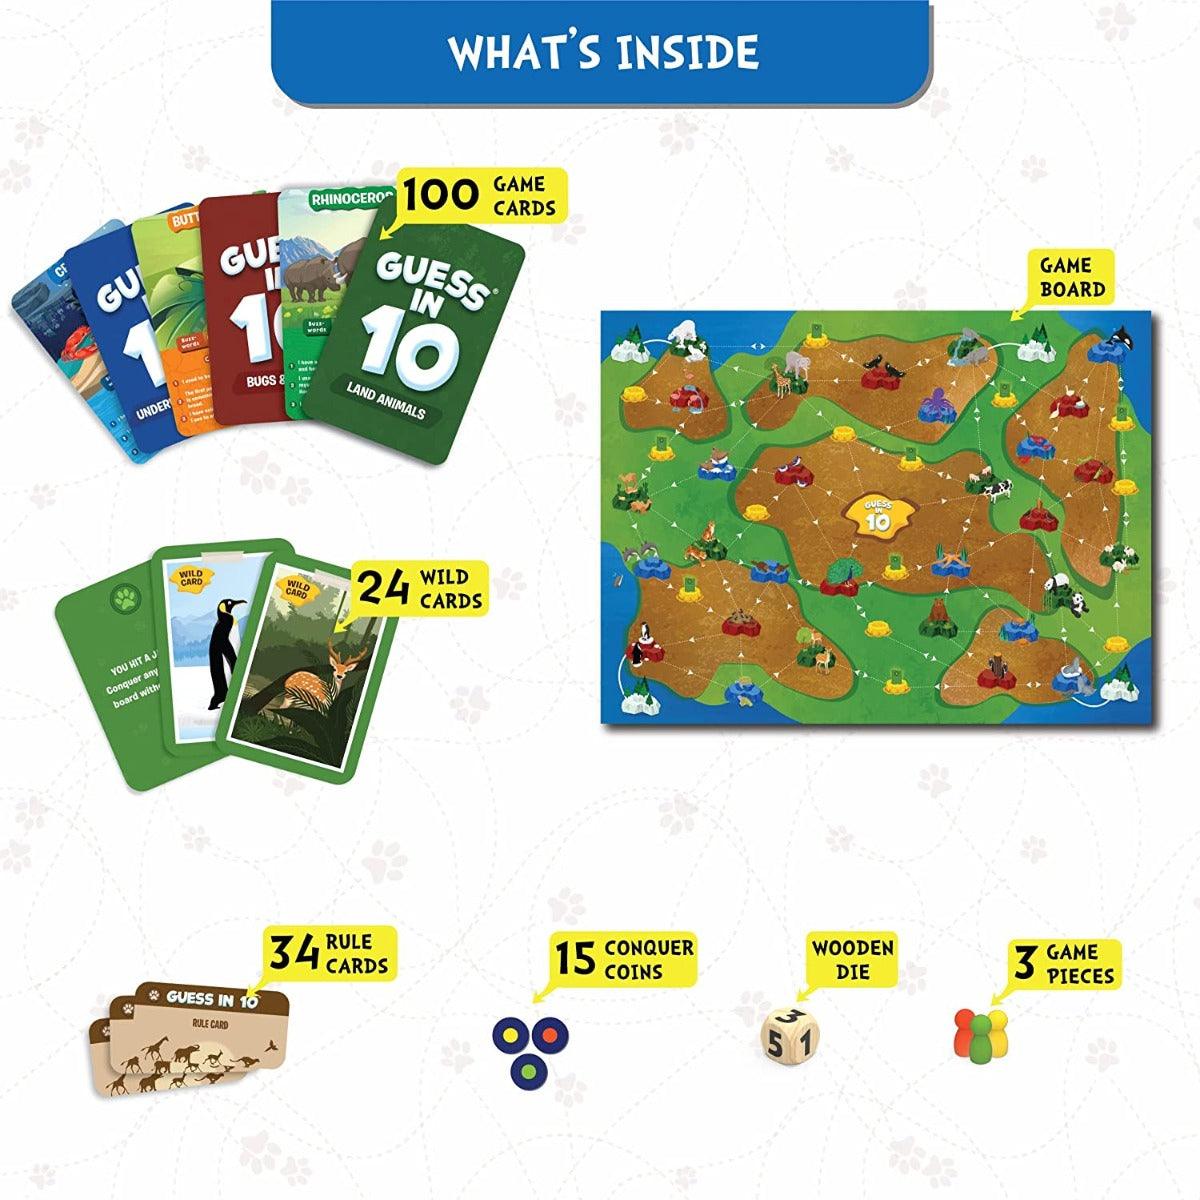 Skillmatics Board Game : Guess in 10 World of Animals - Super Fun Family Game for Ages 6 and Up